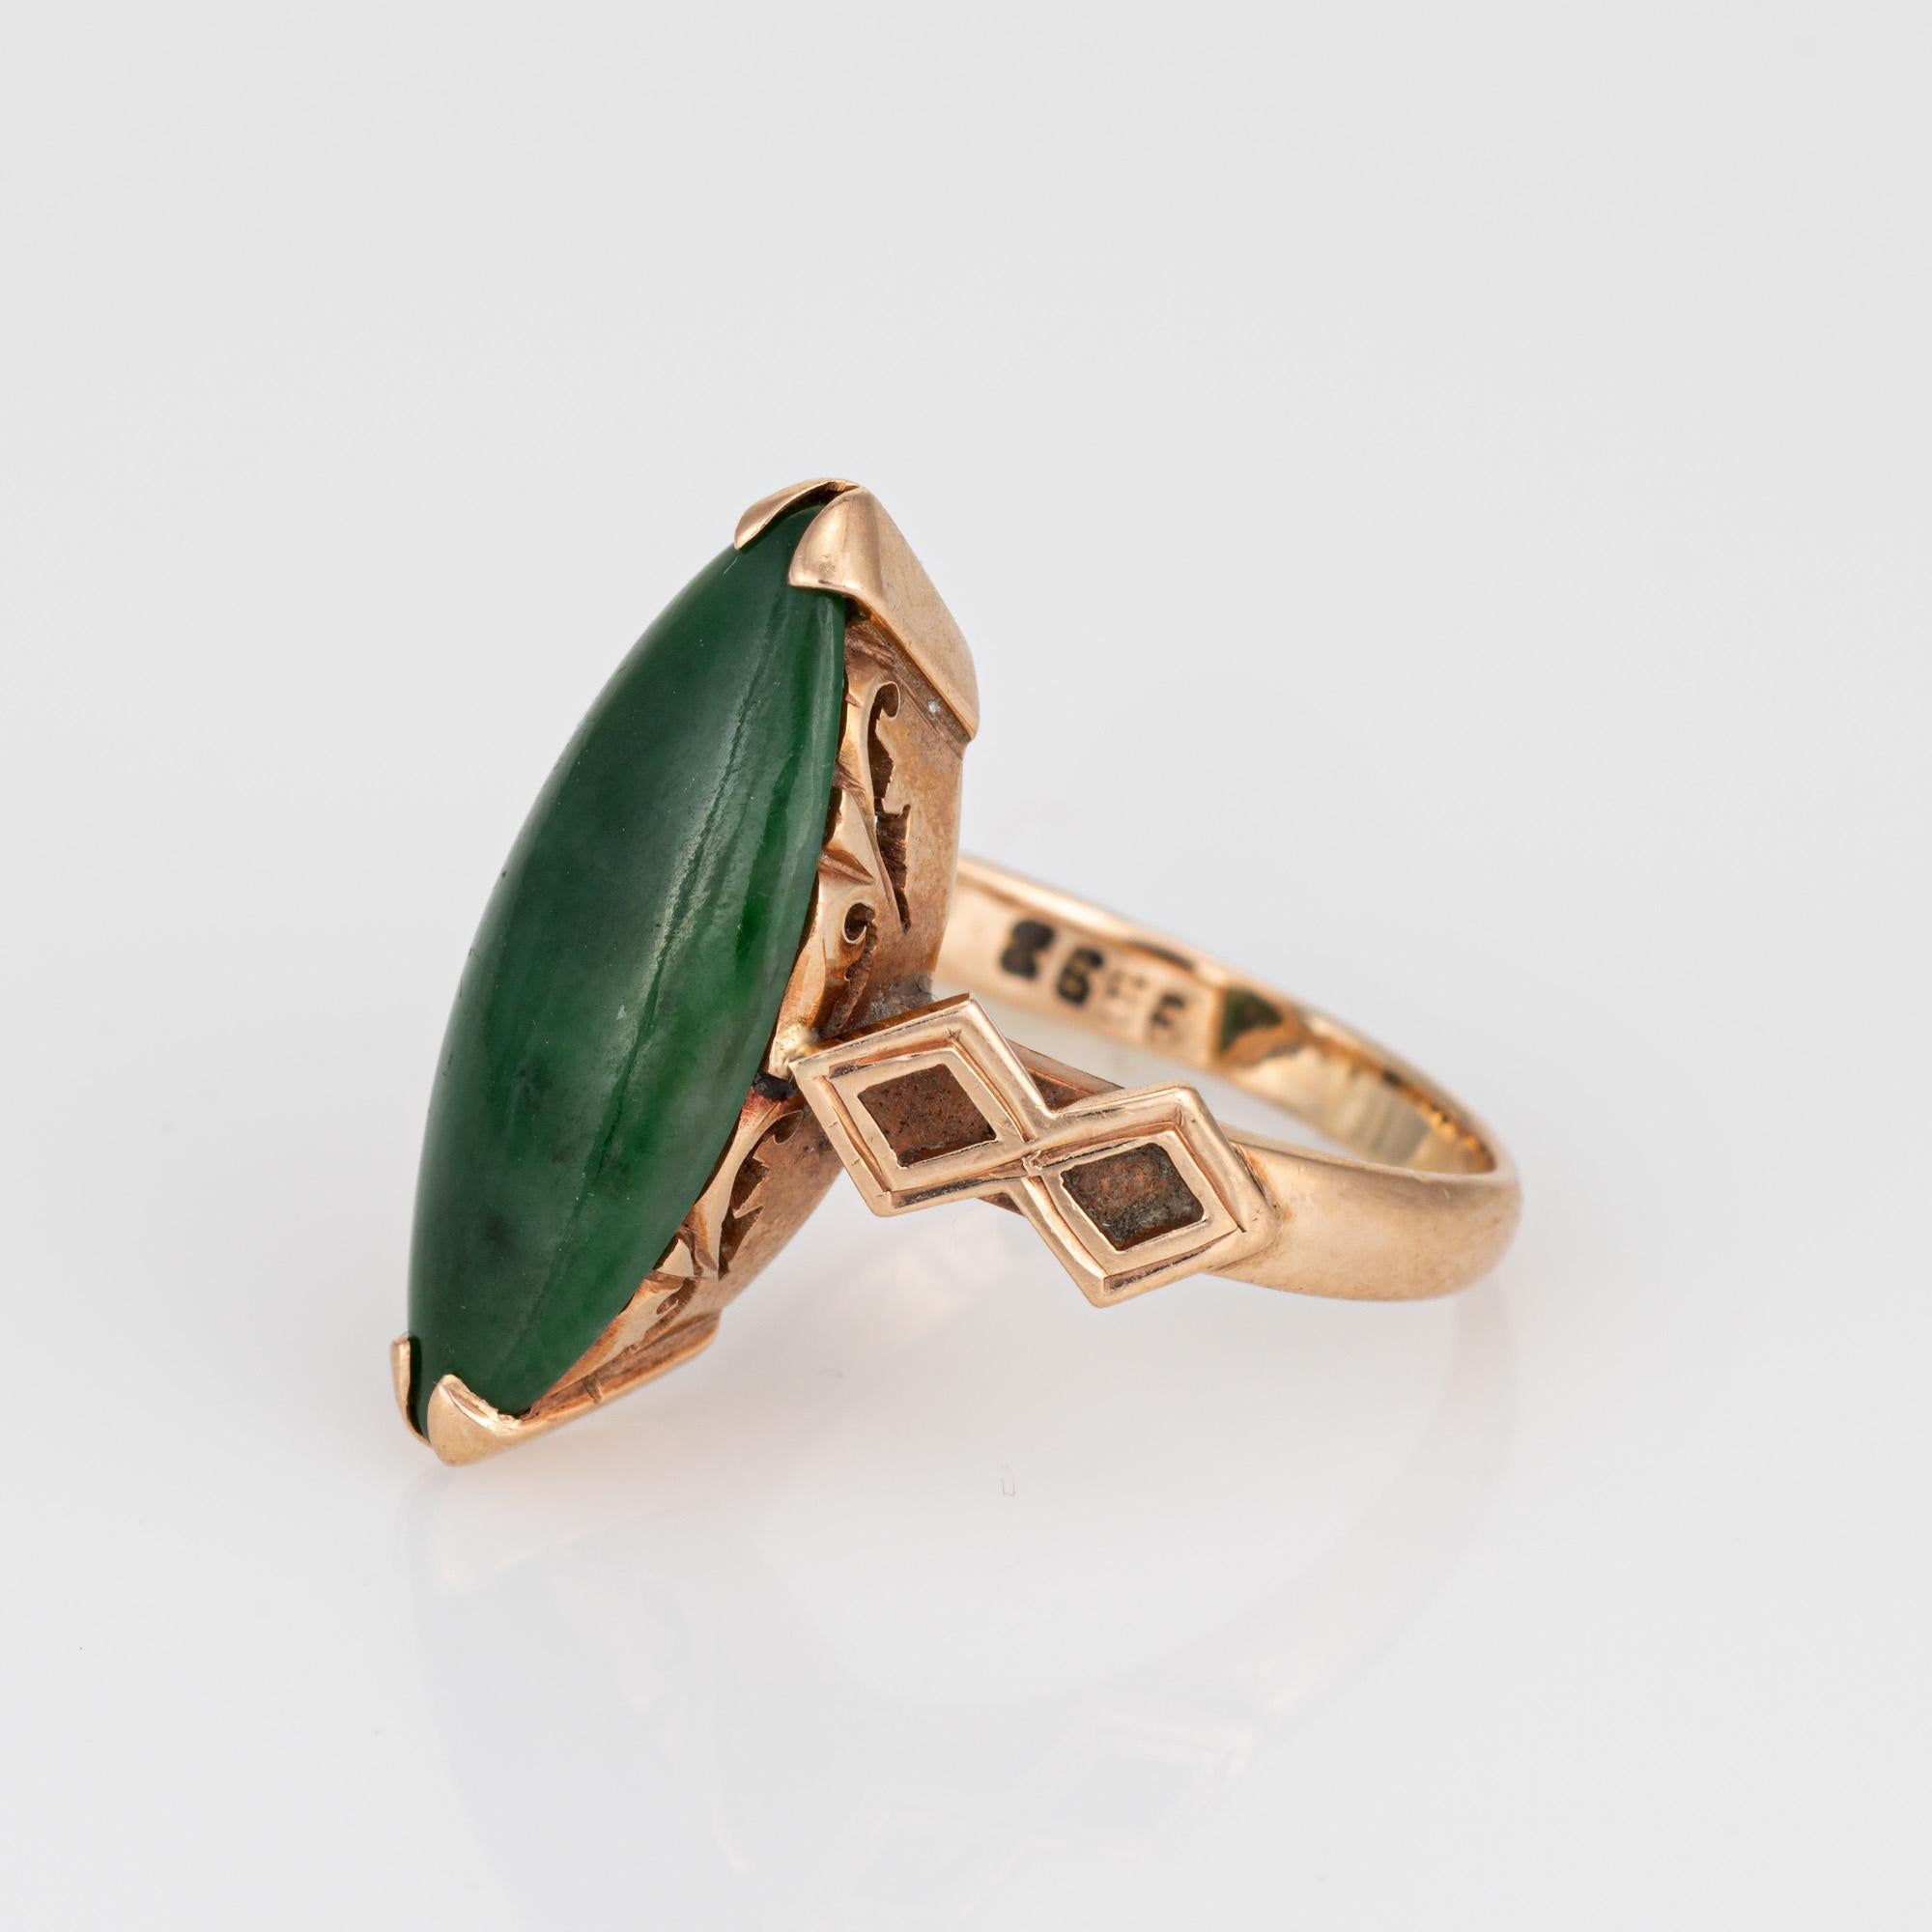 Cabochon Stylish Vintage Jade Navette Style Cocktail Ring 'circa 1960s' Crafted in 14 Kar For Sale